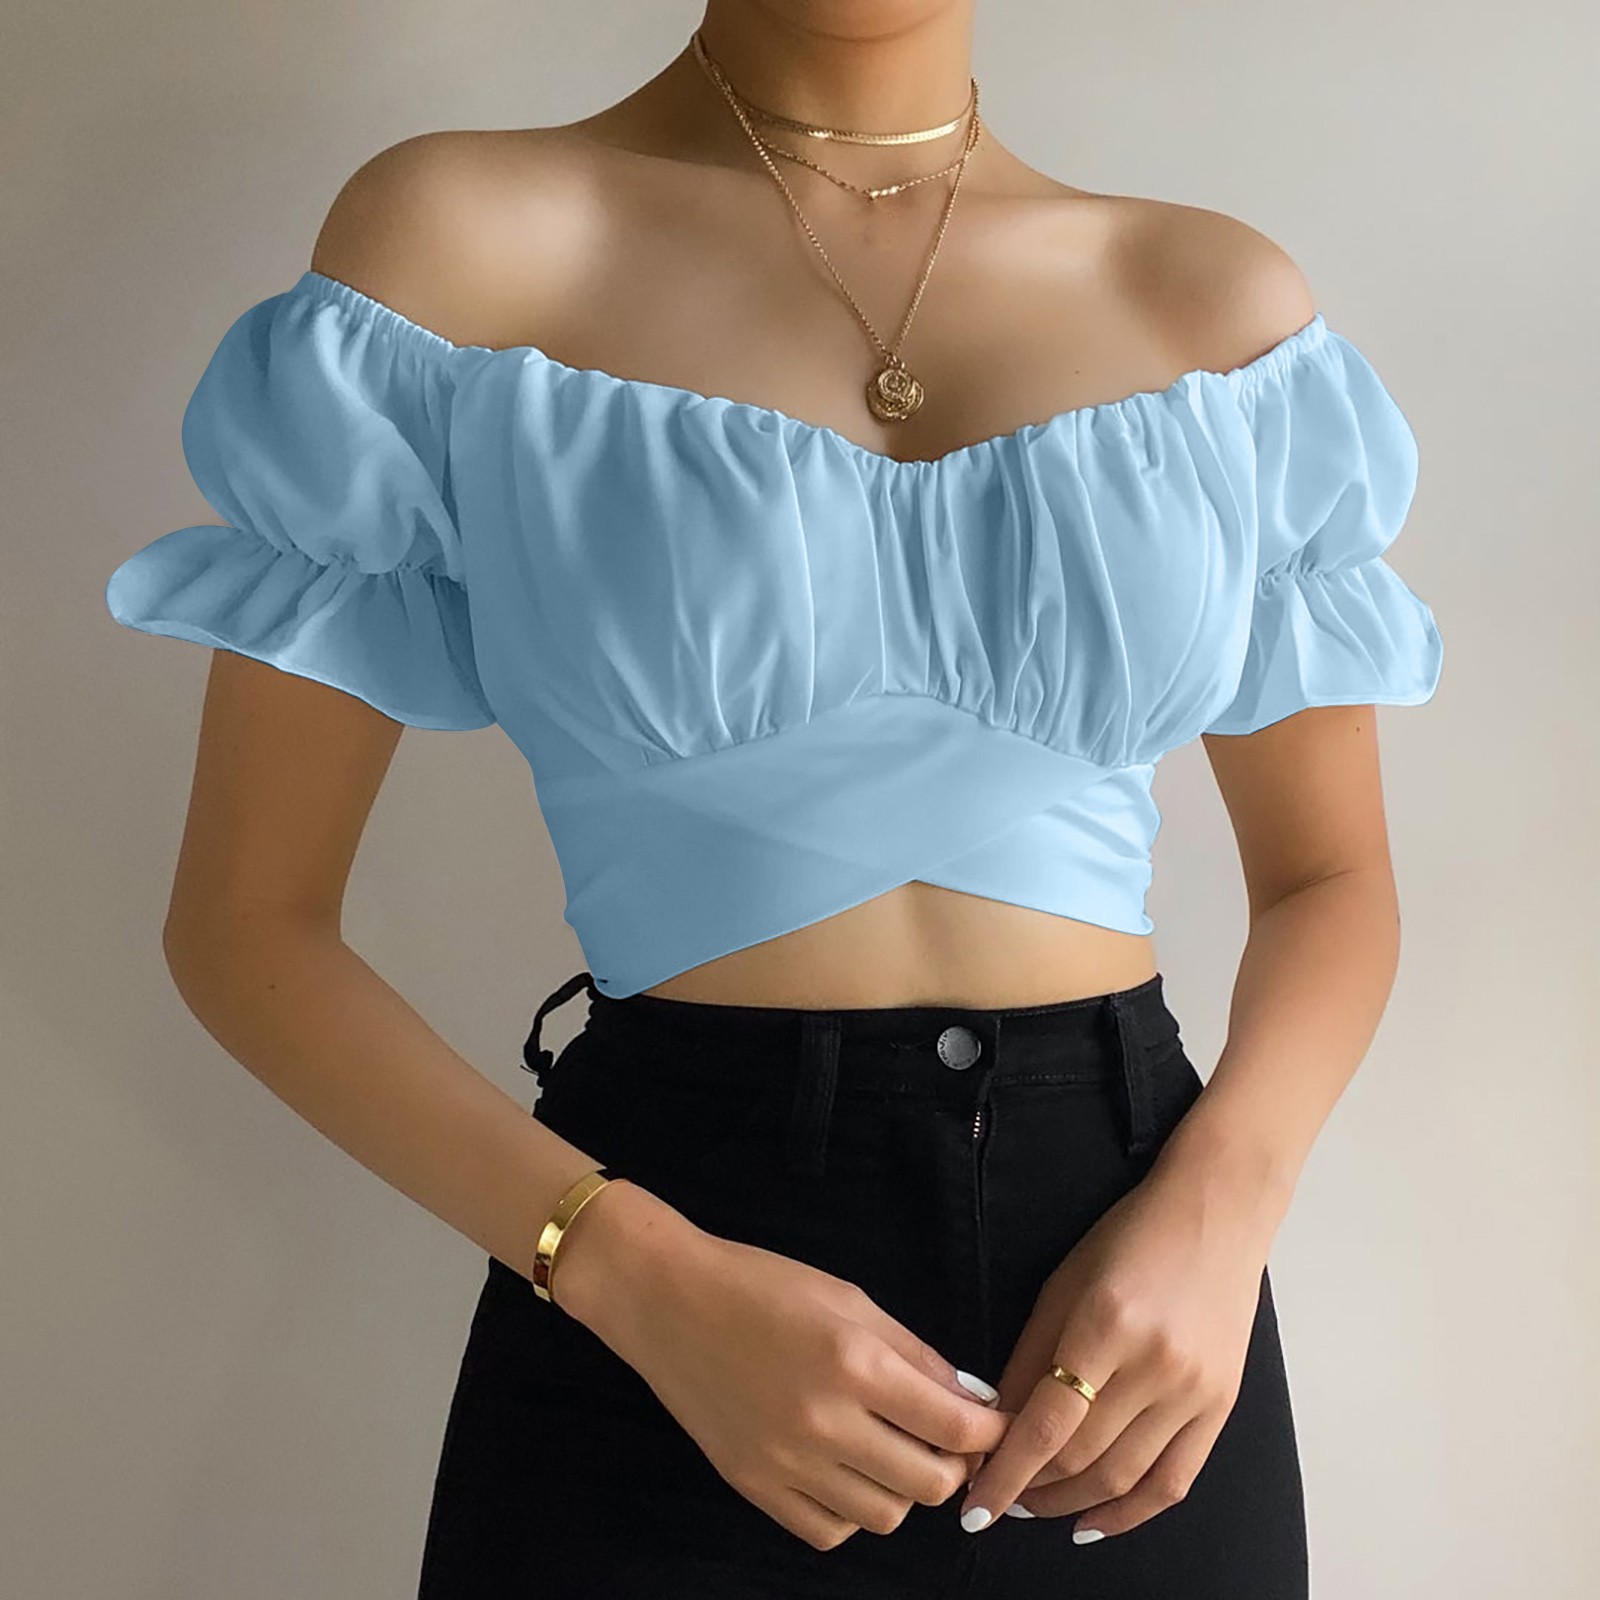 Women's Off Shoulder Crop Top Floral Print Strapless Short Sleeve V Neck Blouses Sexy Crisscross Cropped Tee Shirt - image 1 of 8